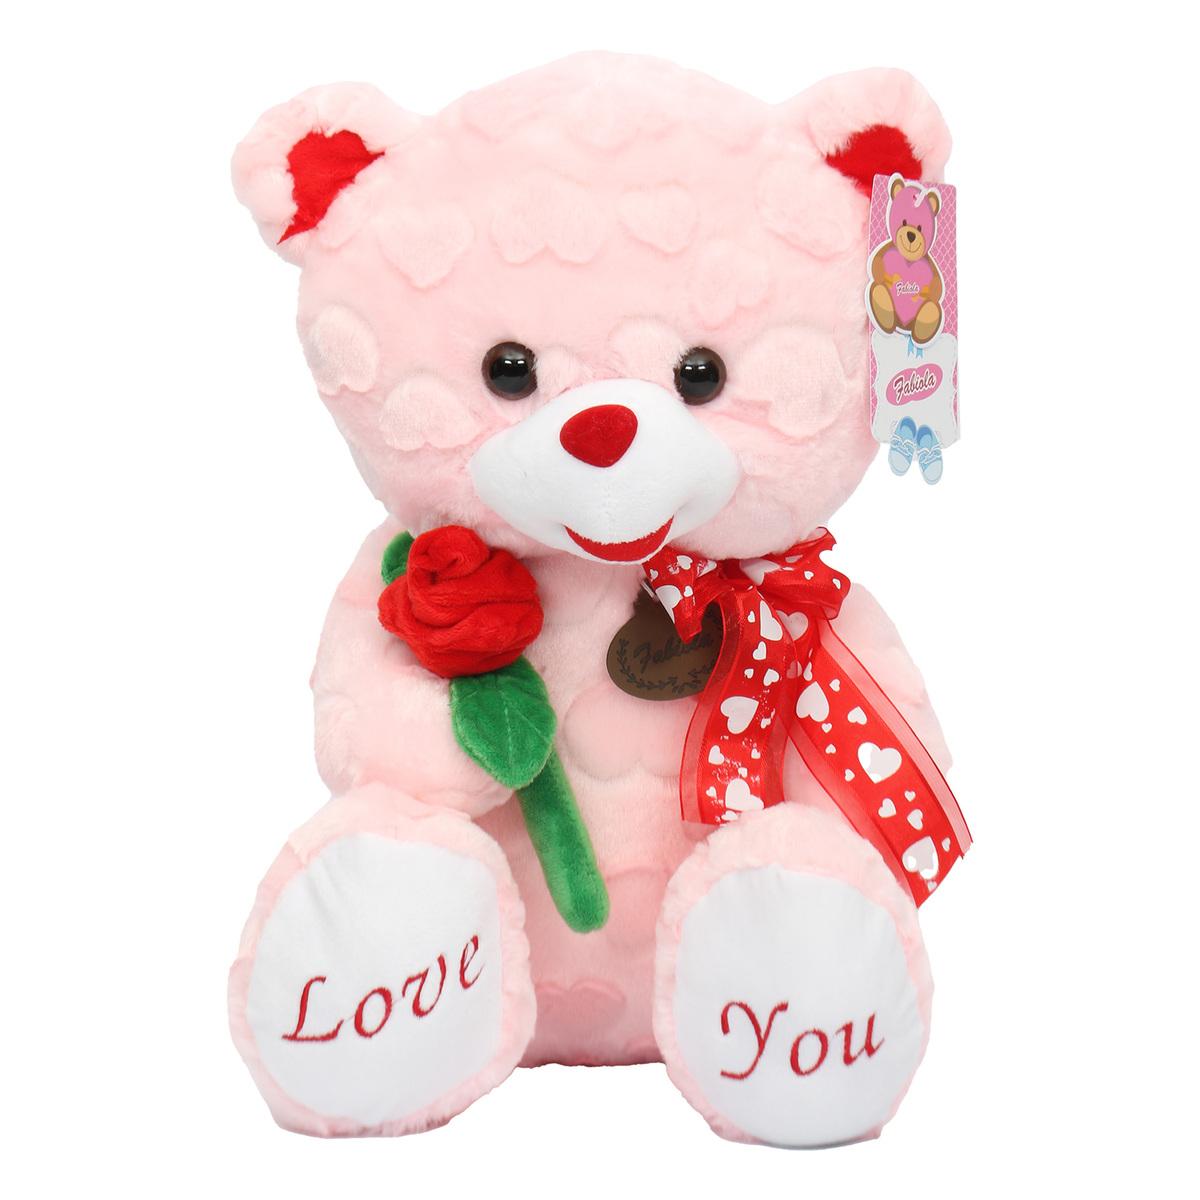 AD041 Girl Ribbon Teddy Bear 40cm(H) Teddy Bear & Plush Toy with flower  delivery to Malaysia